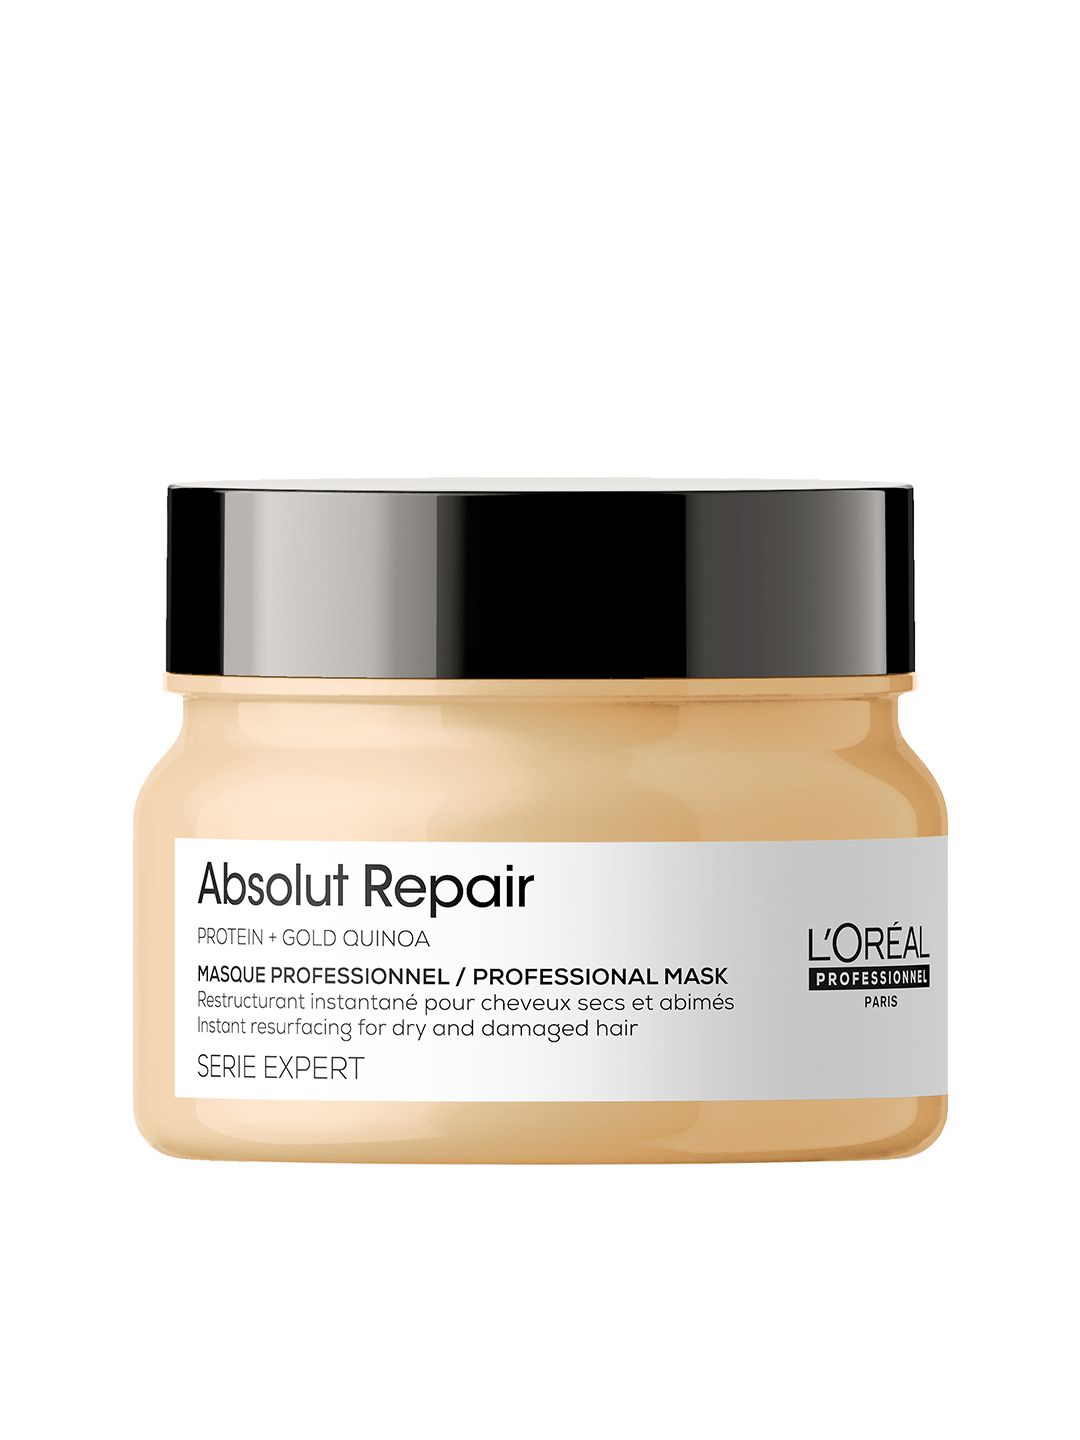 LOreal Professionnel Serie Expert Absolut Repair Mask 250g Price in India